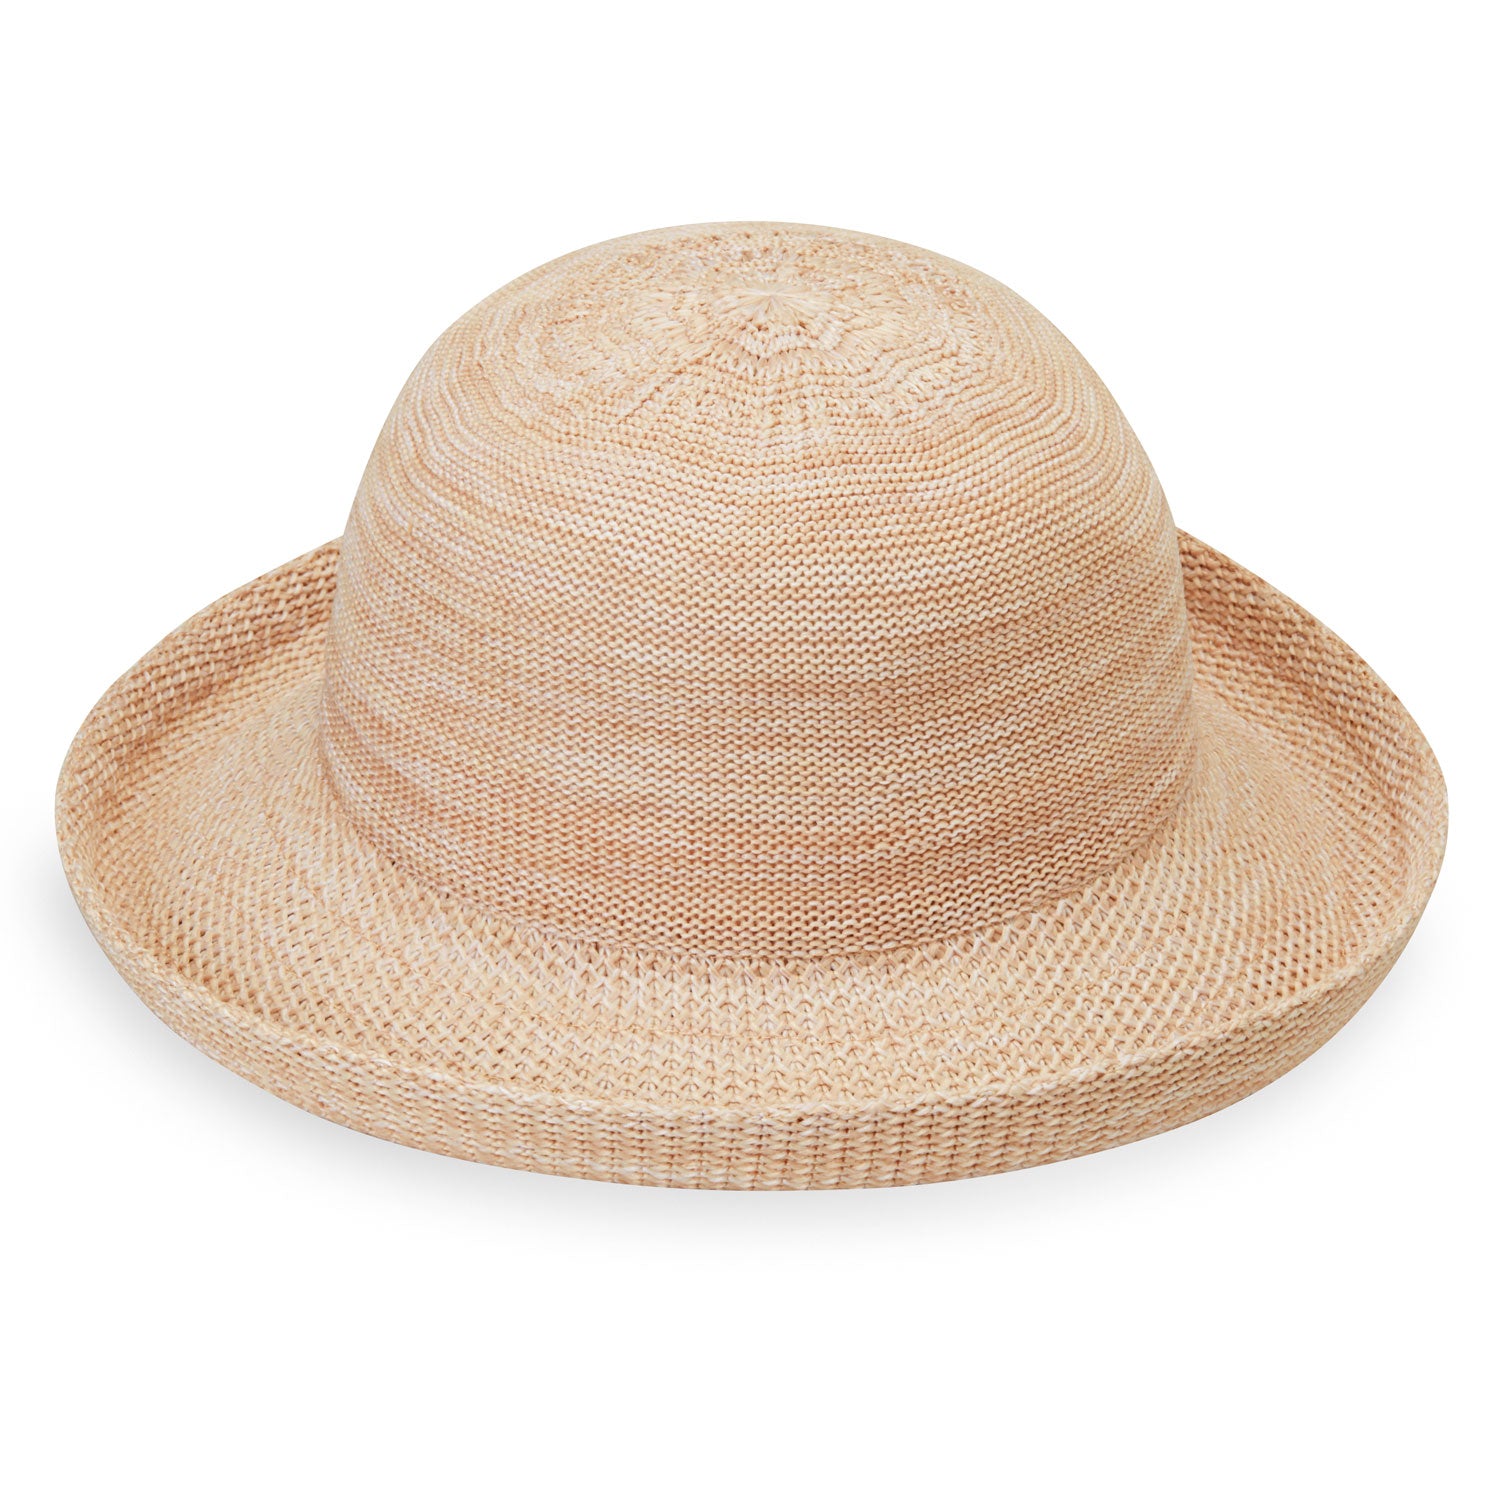 Featuring Women's Packable Wide Brim Petite Victoria Poly-straw Sun Hat in Mixed Beige from Wallaroo